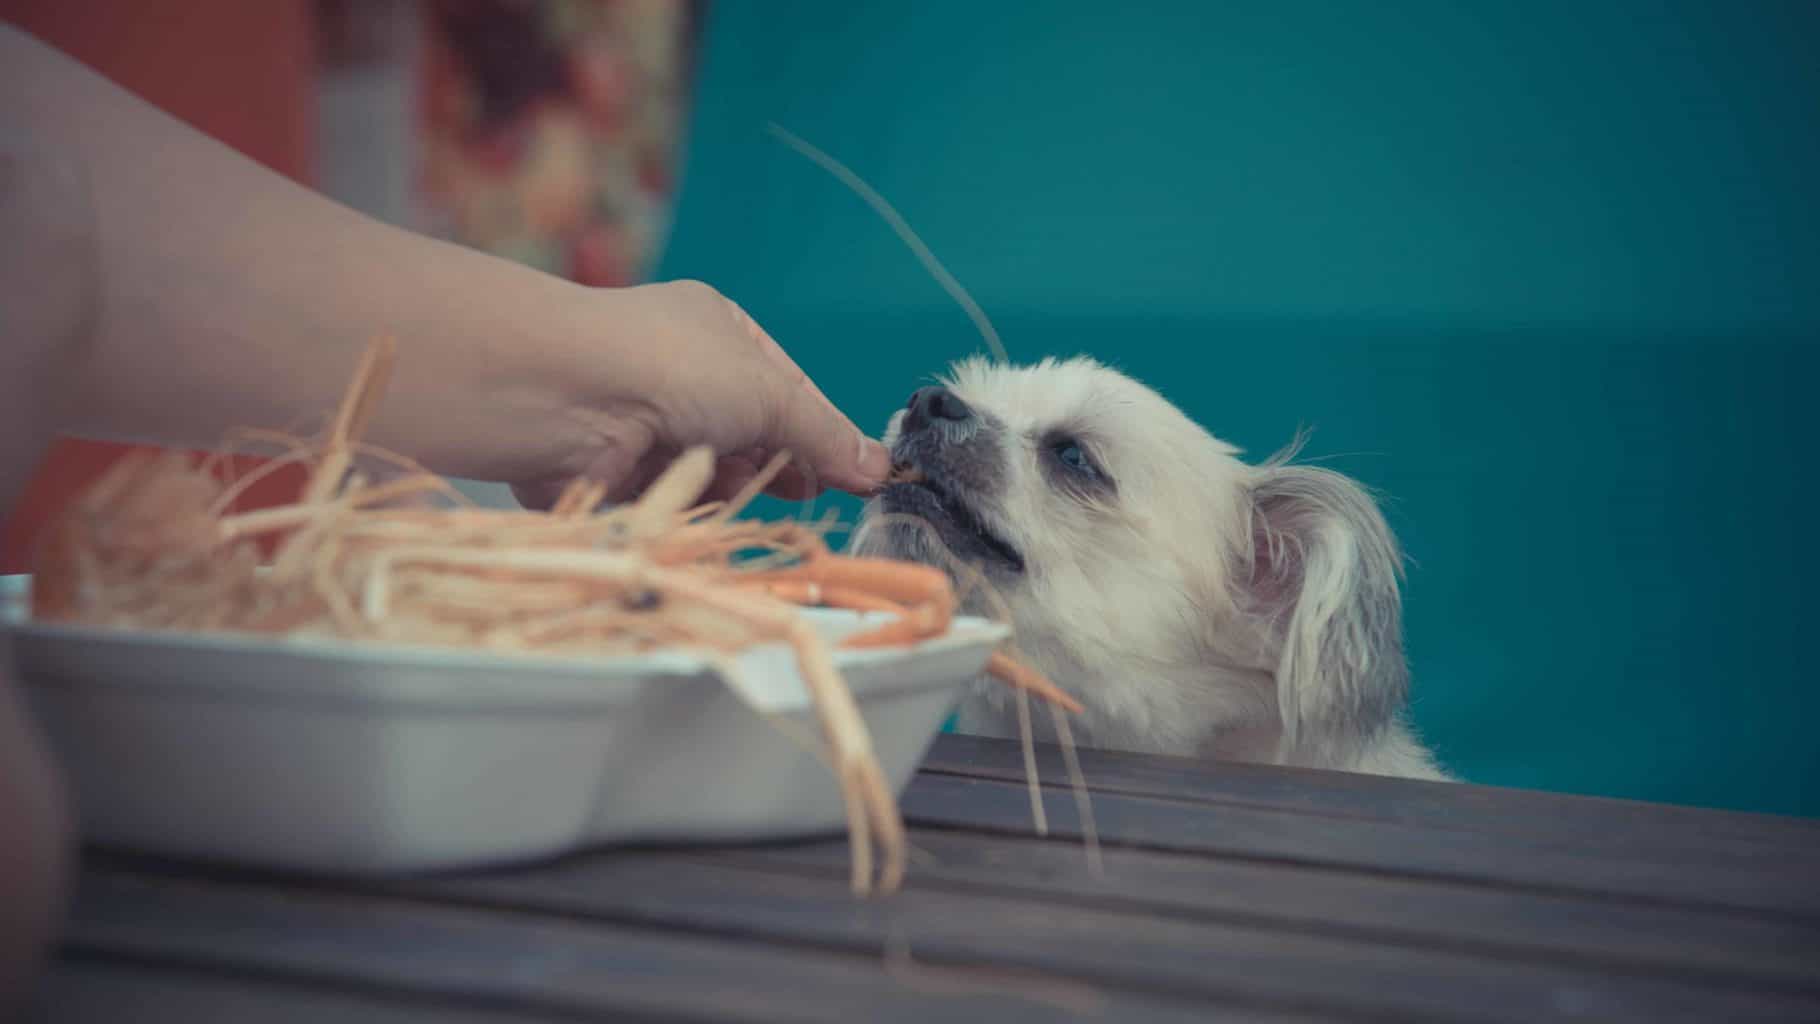 Woman feeds small dog shrimp. Can dogs eat shrimp? Yes, but always remove veins, plus shells and tails to reduce choking hazards. Boil or steam shrimp first.